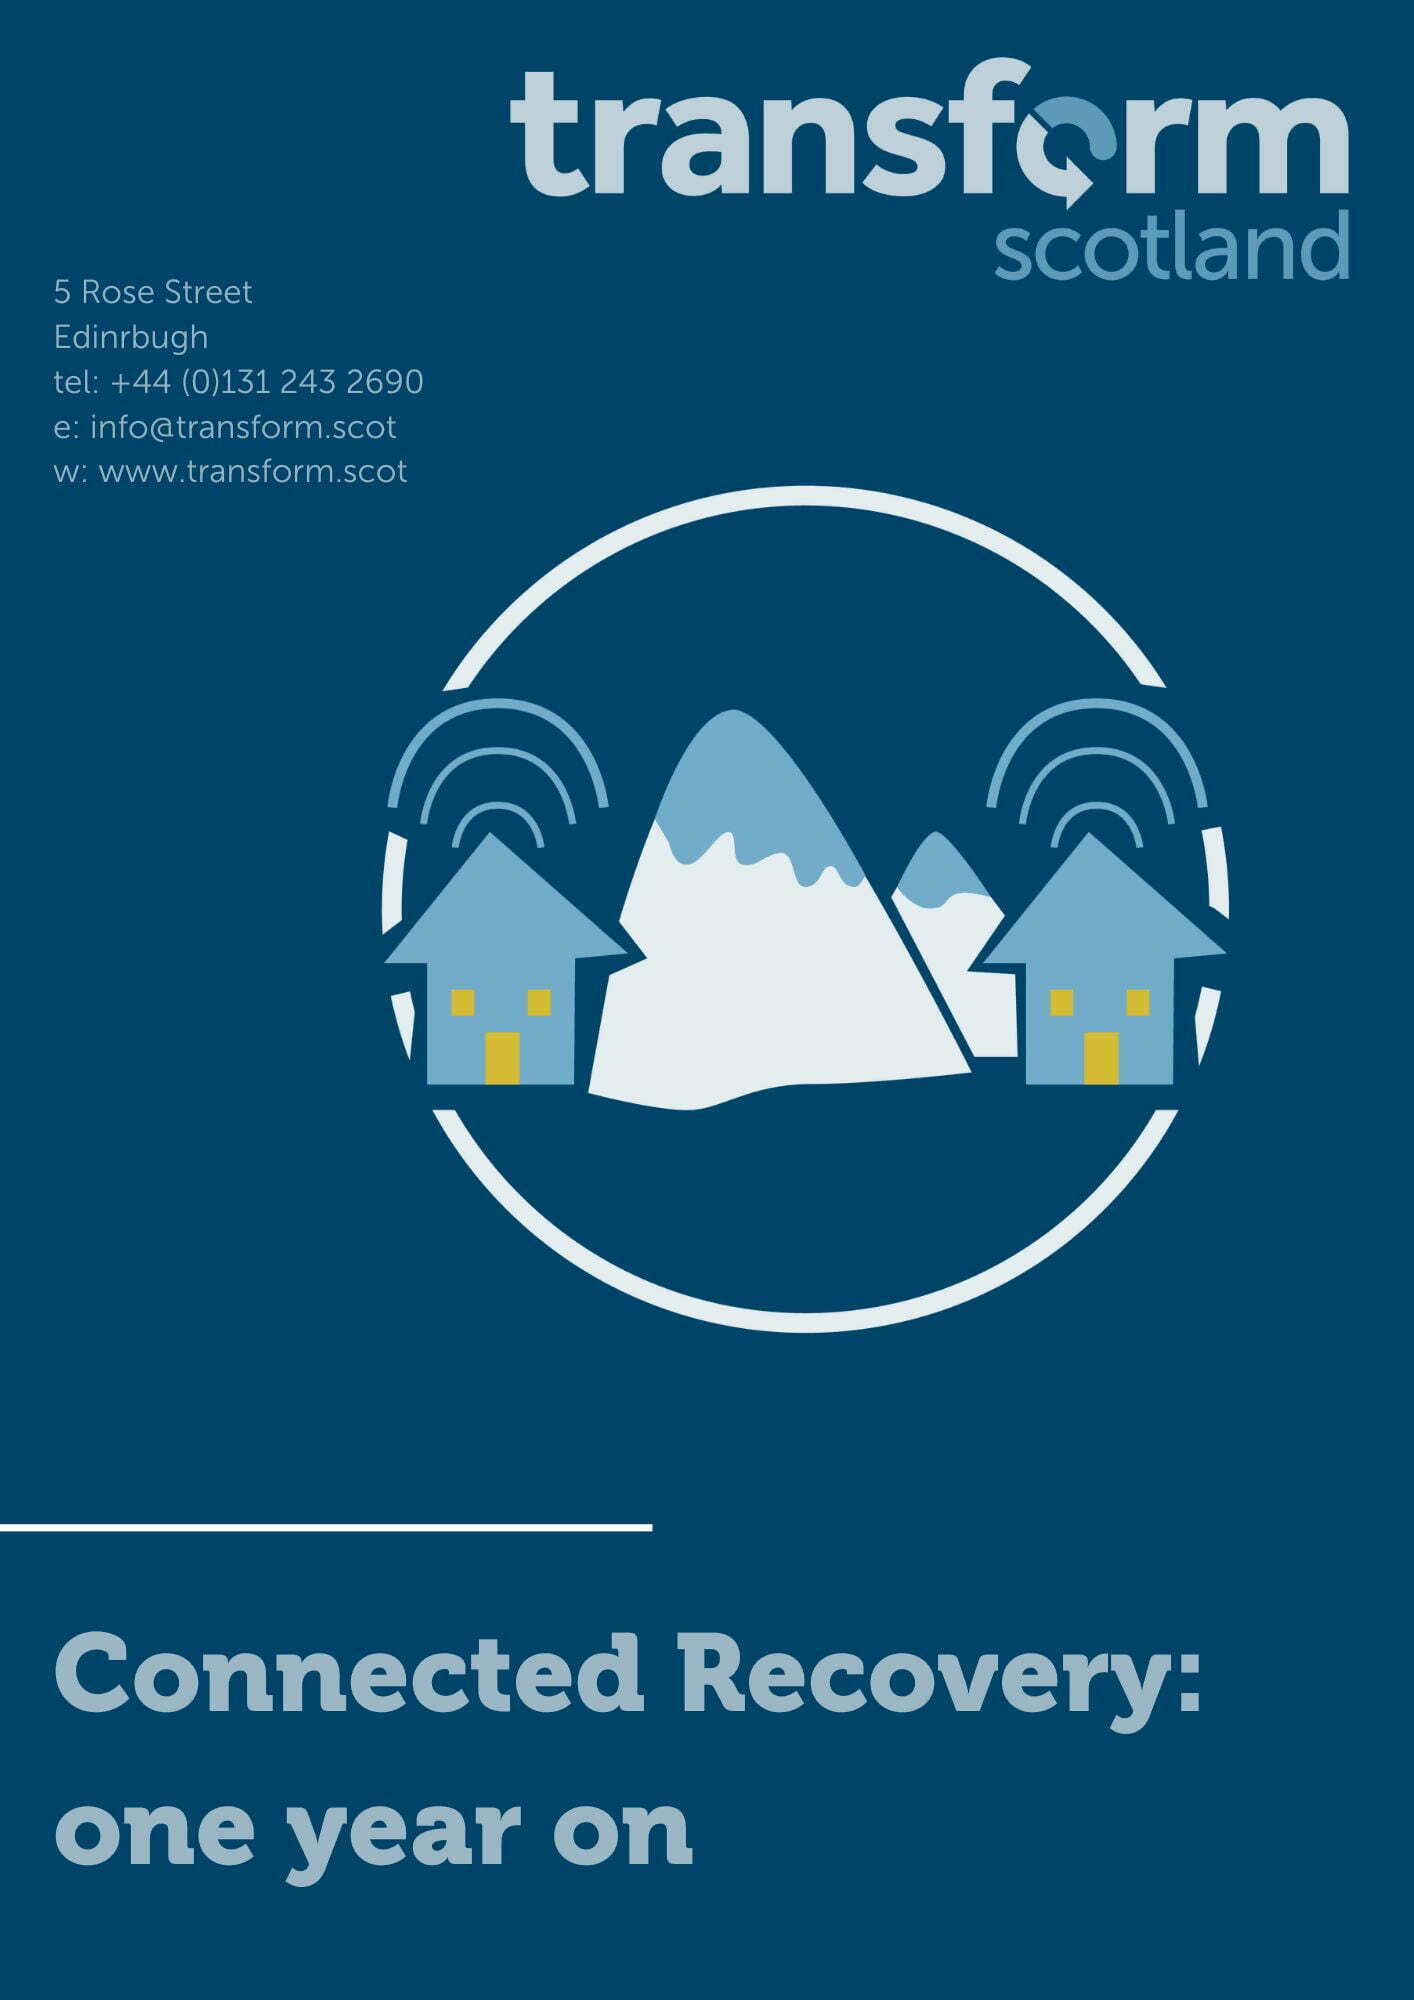 ‘Connected Recovery’ — one year on